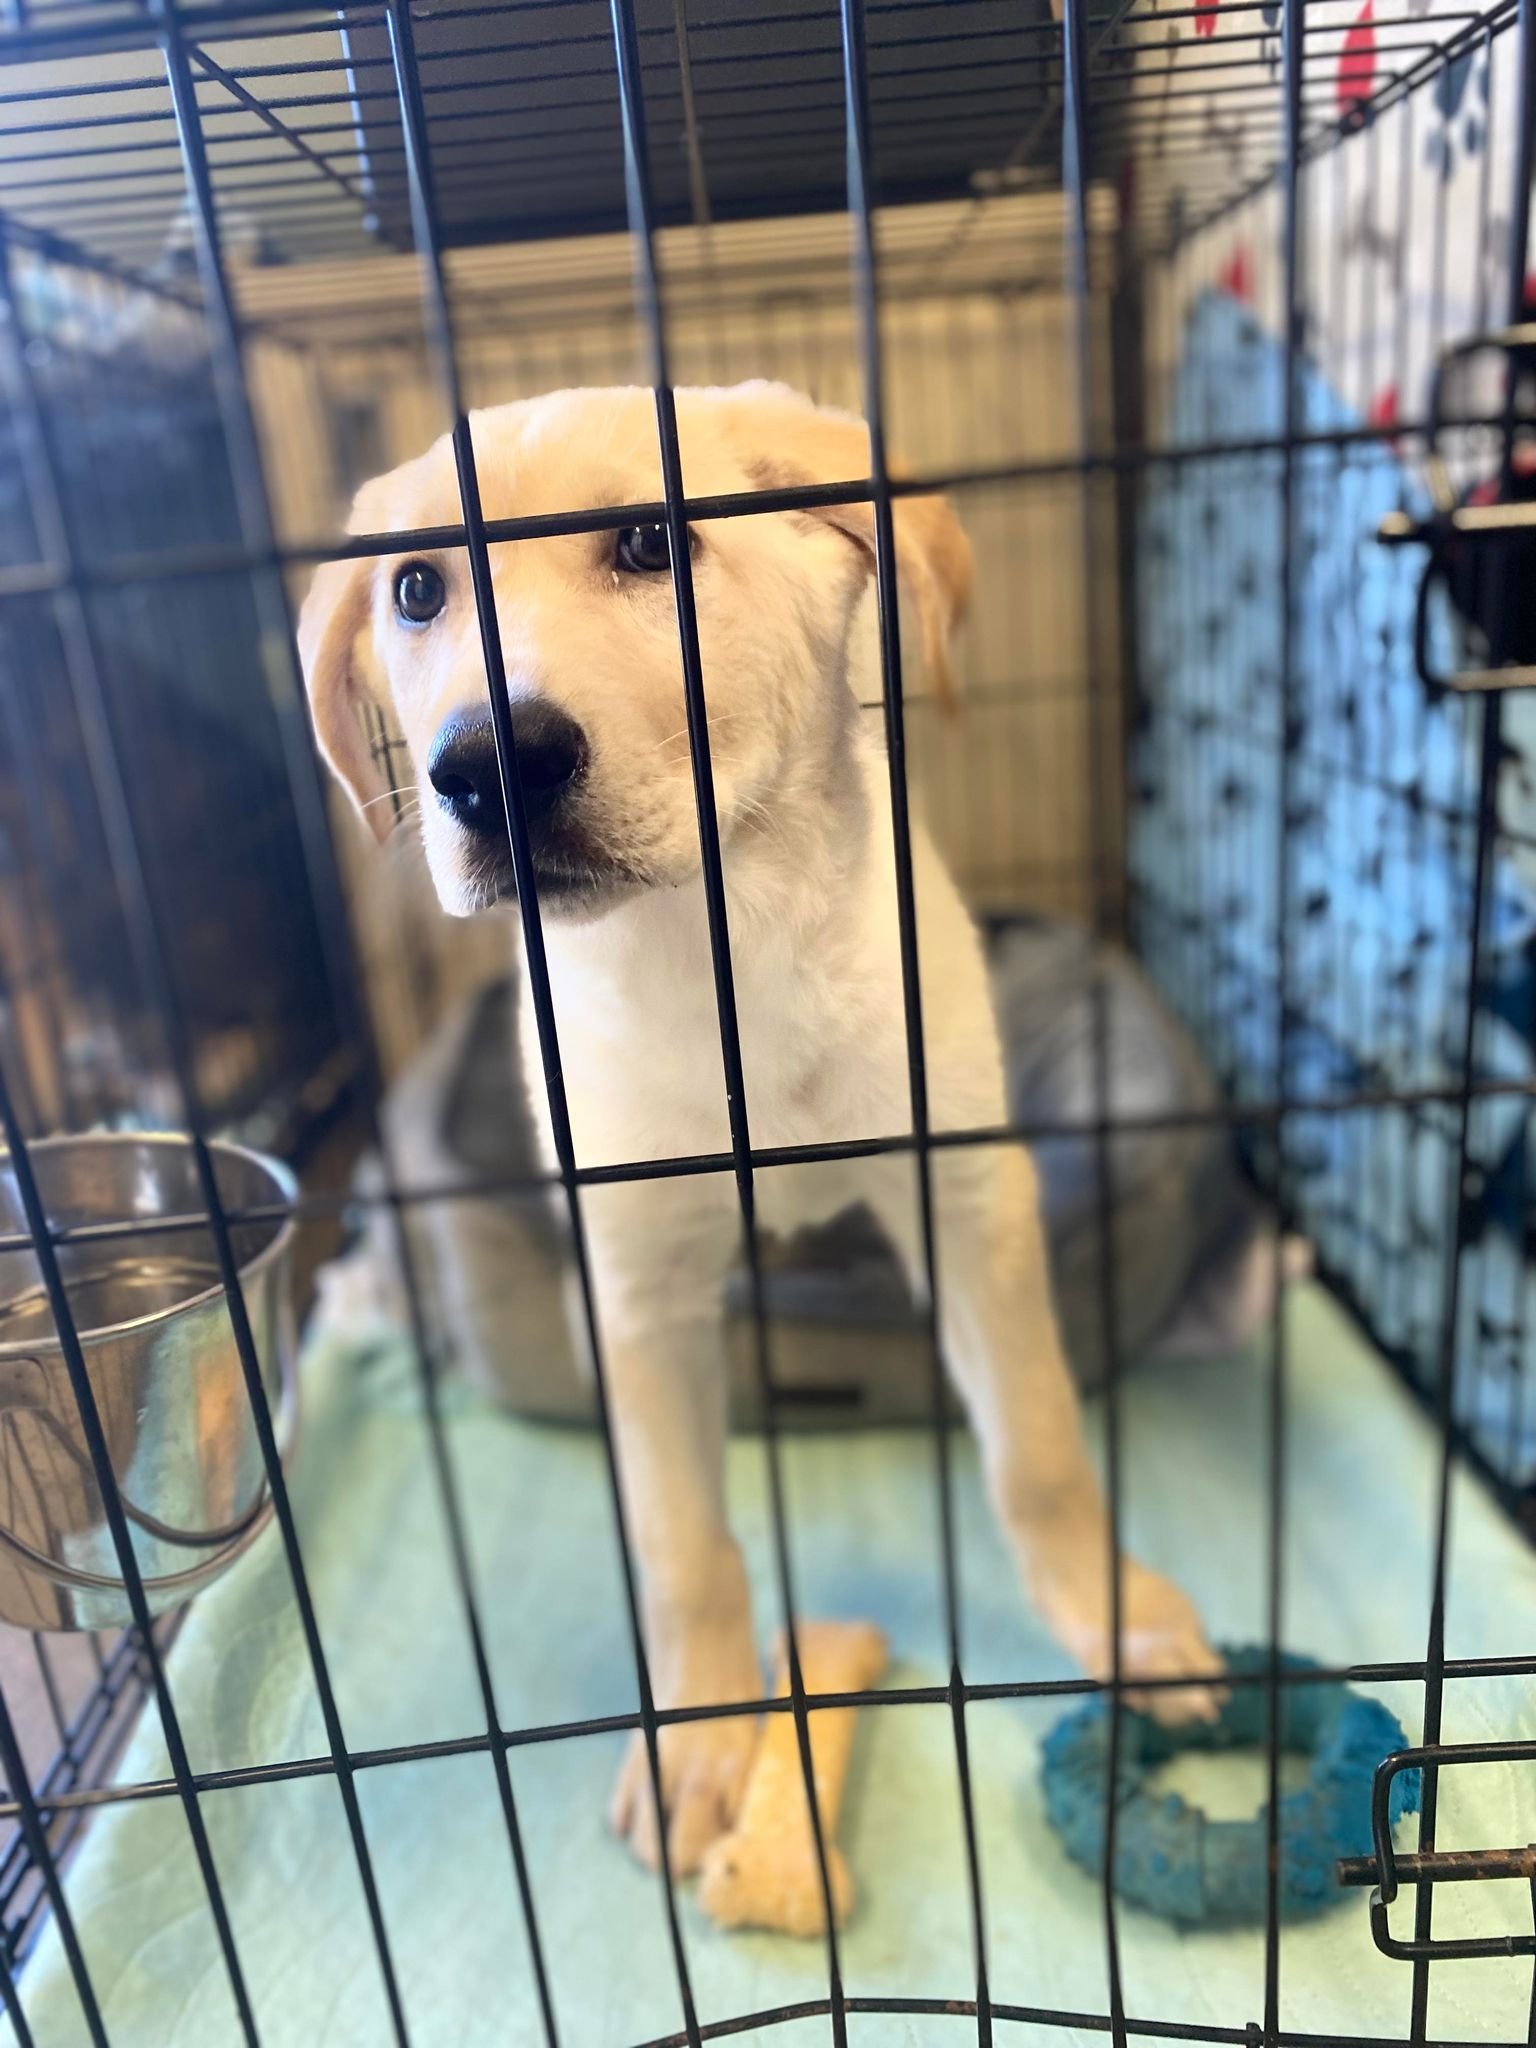 Dog for Adoption - Dolly (Yellow Lab pup) - Darling Pup!, a Labrador ...